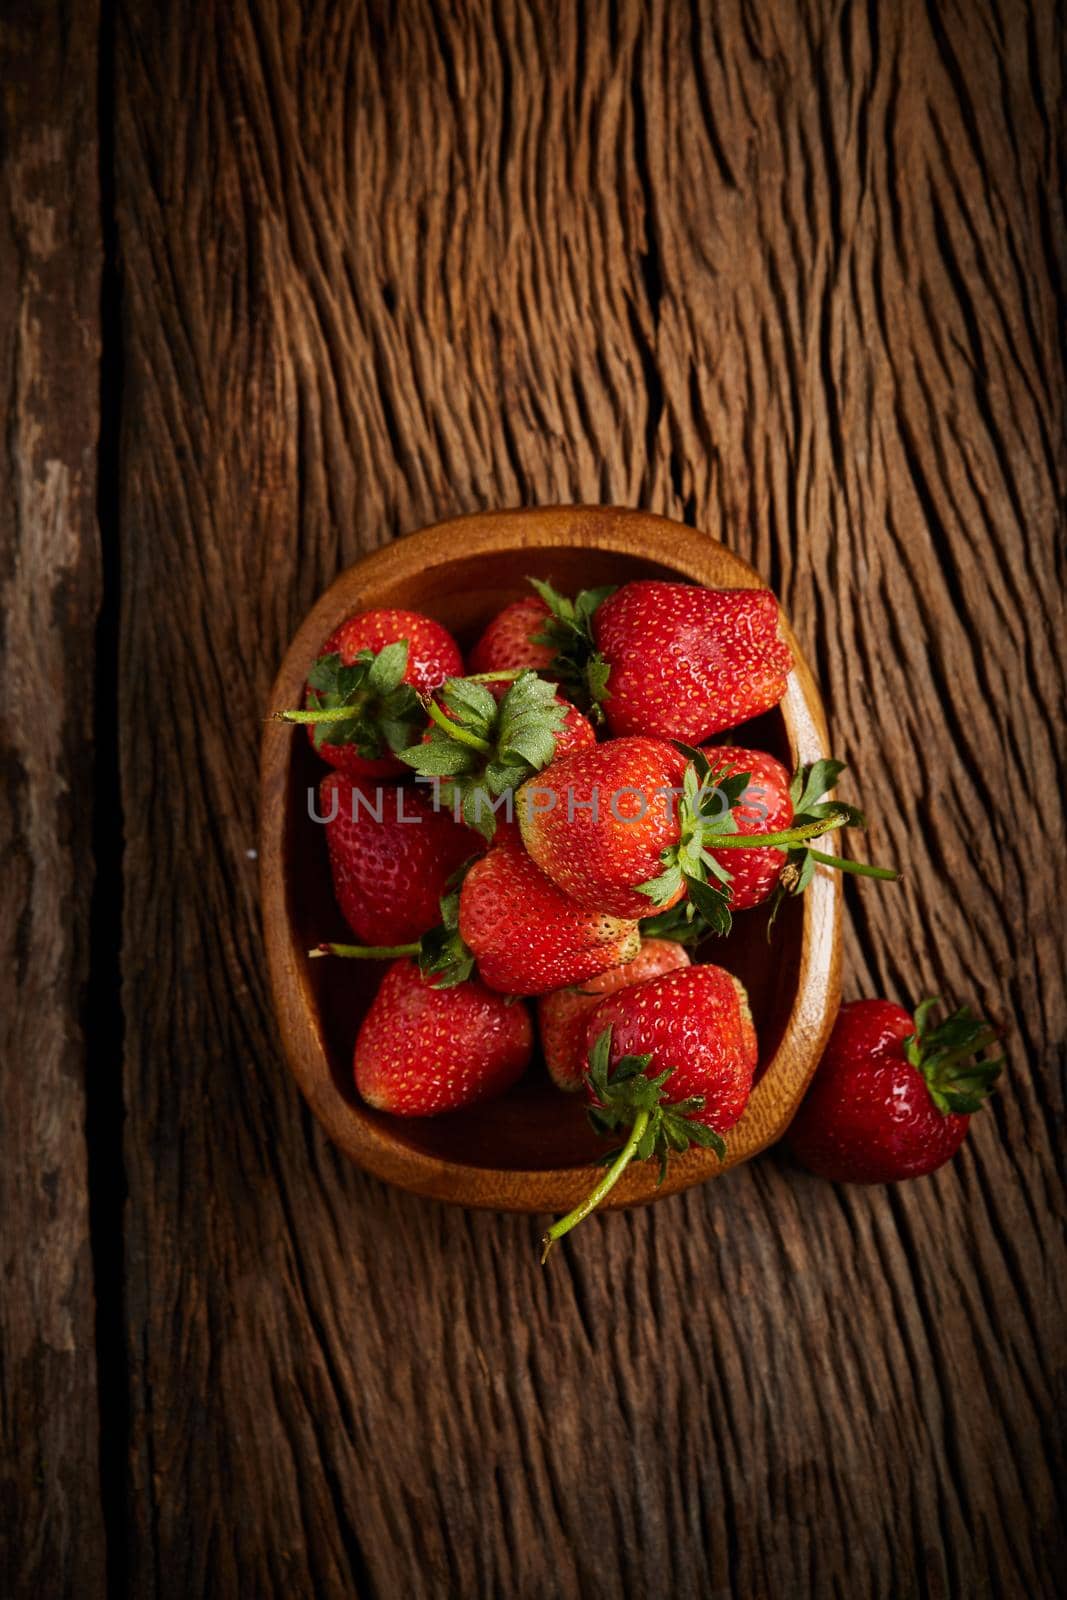 Strawberries on wood by Wasant